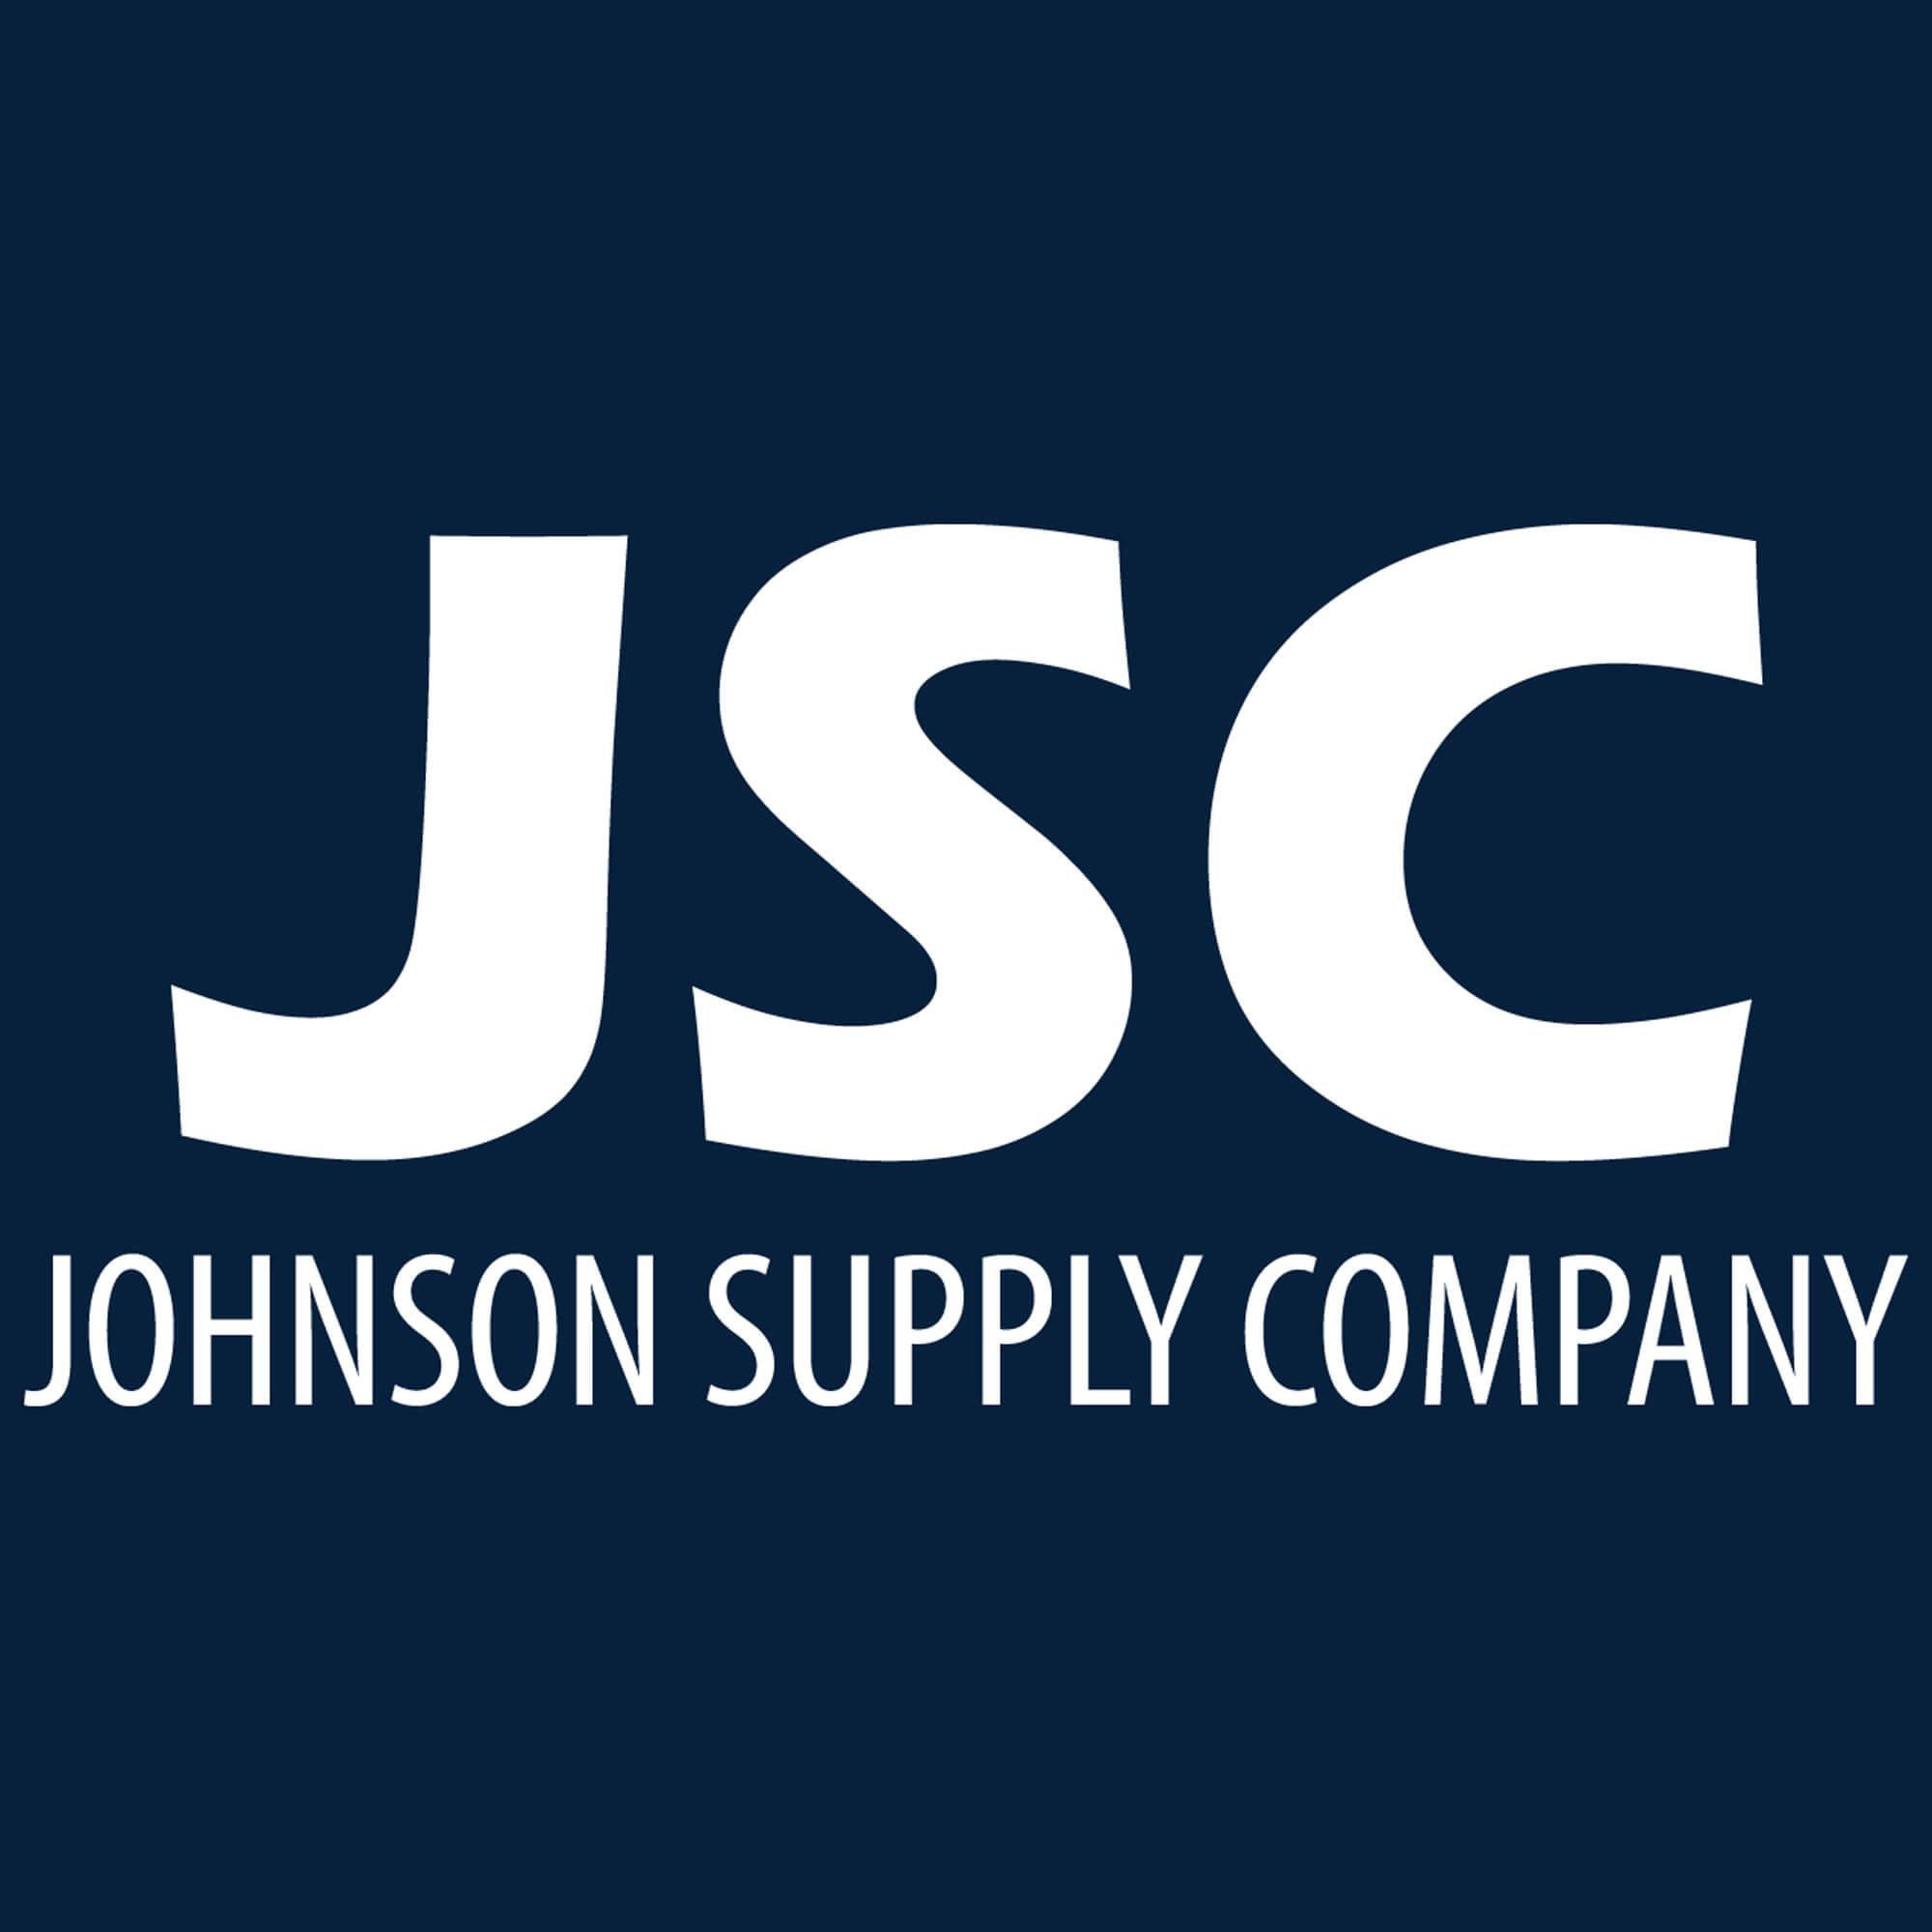 Product JSC Products from Berry Global - Johnson Supply Company image